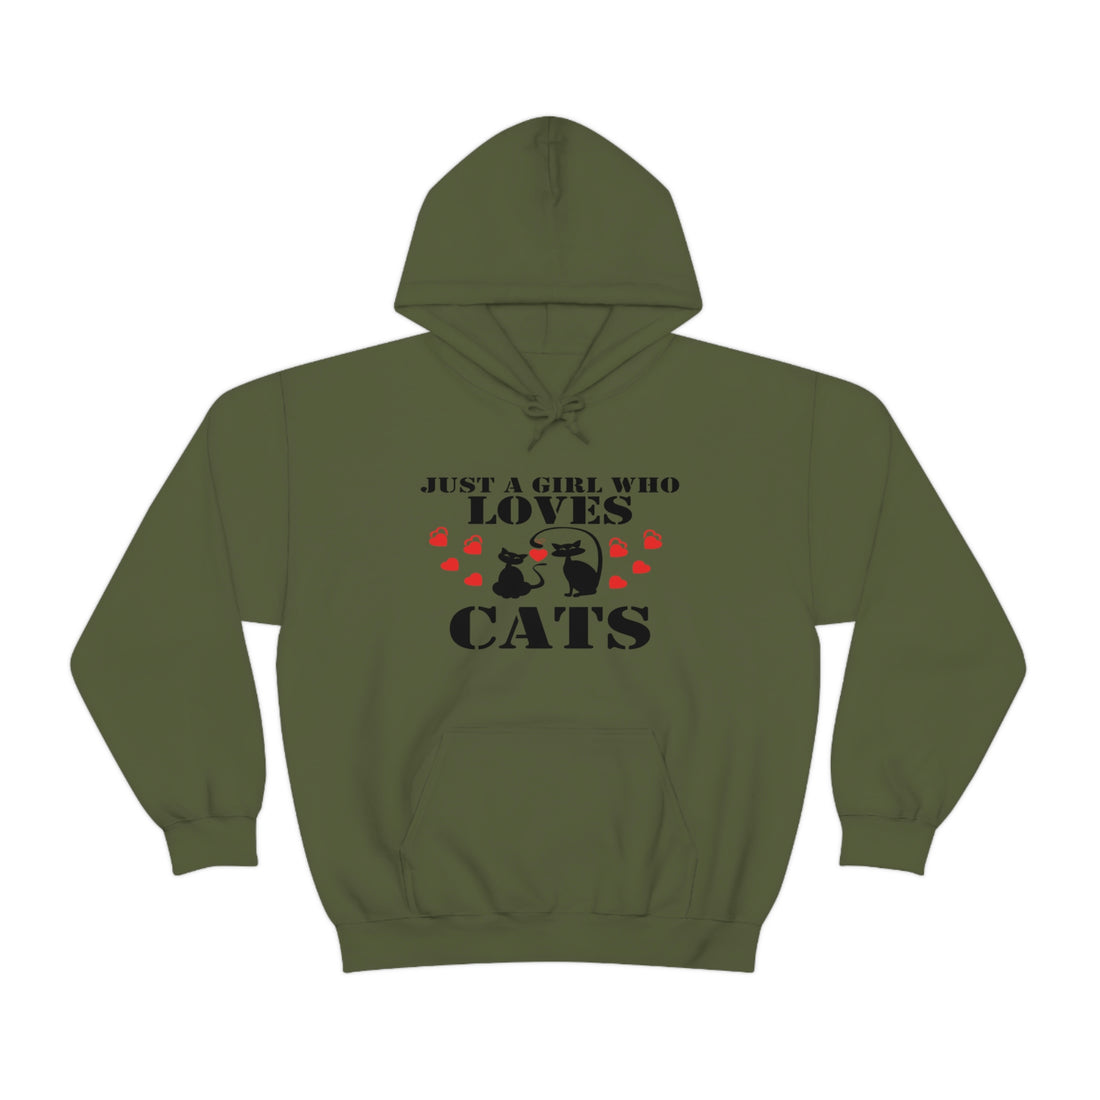 Just a Girl Who Loves Cats - Unisex Heavy Blend™ Hooded Sweatshirt